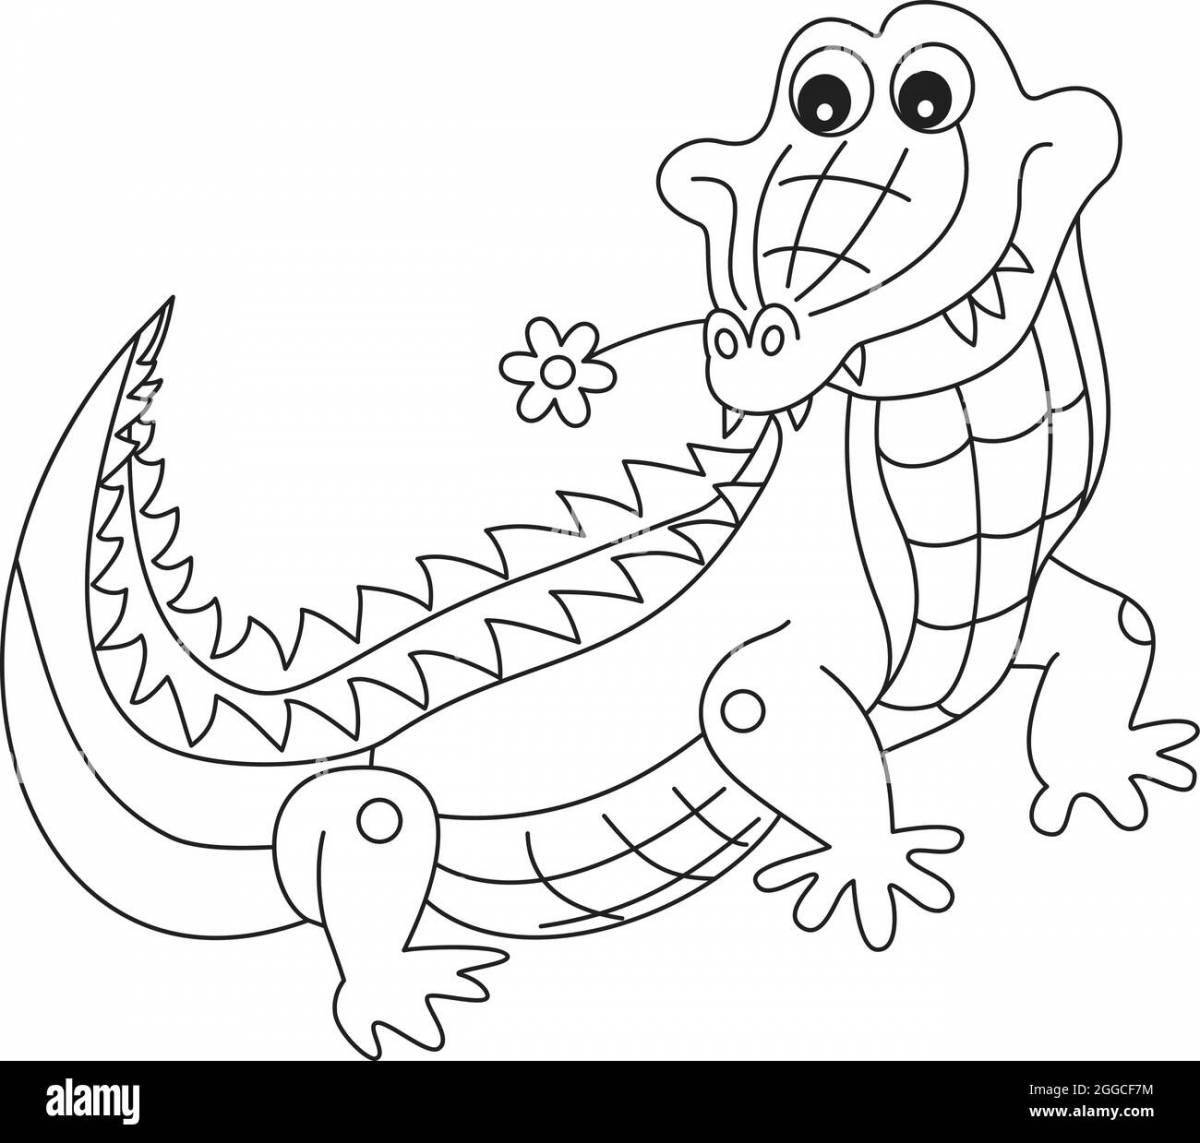 Cute crocodile coloring book for 3-4 year olds